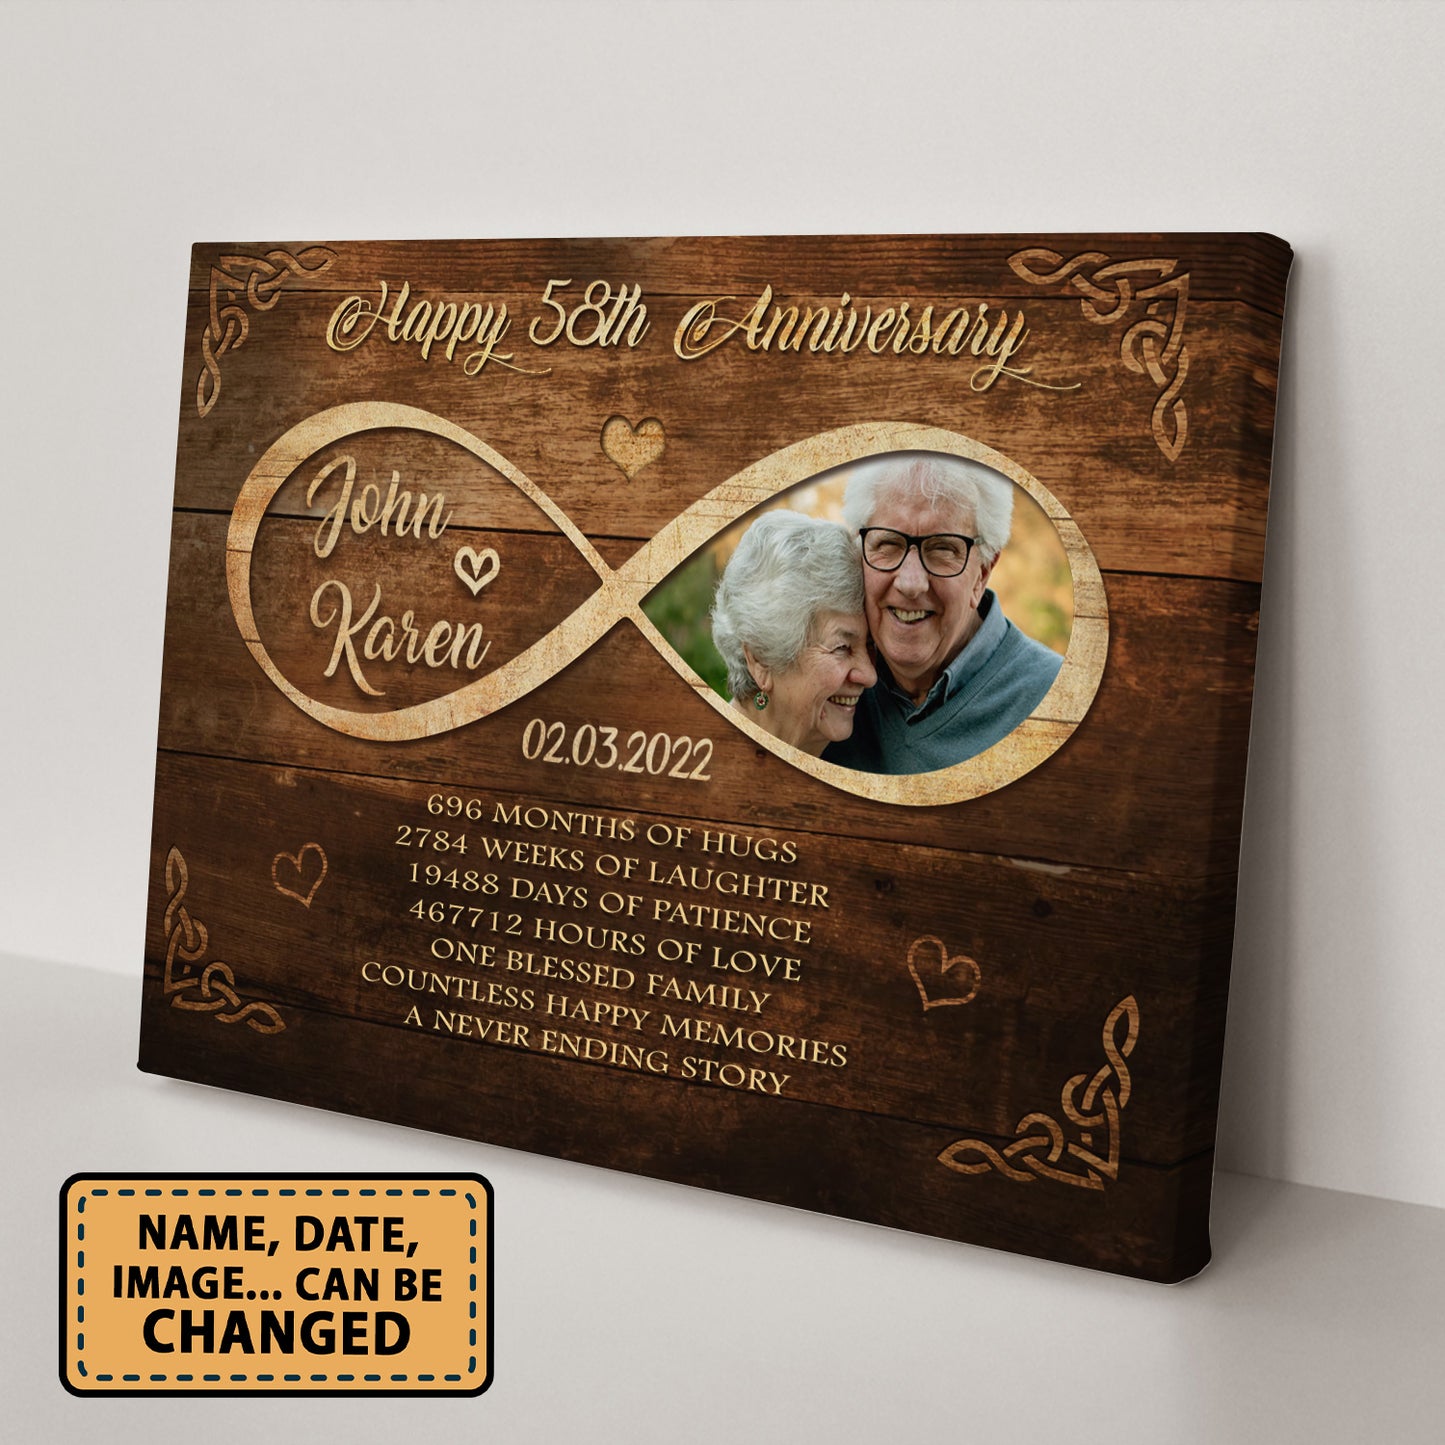 Happy 58th Anniversary Old Television Anniversary Canvas Valentine Gifts